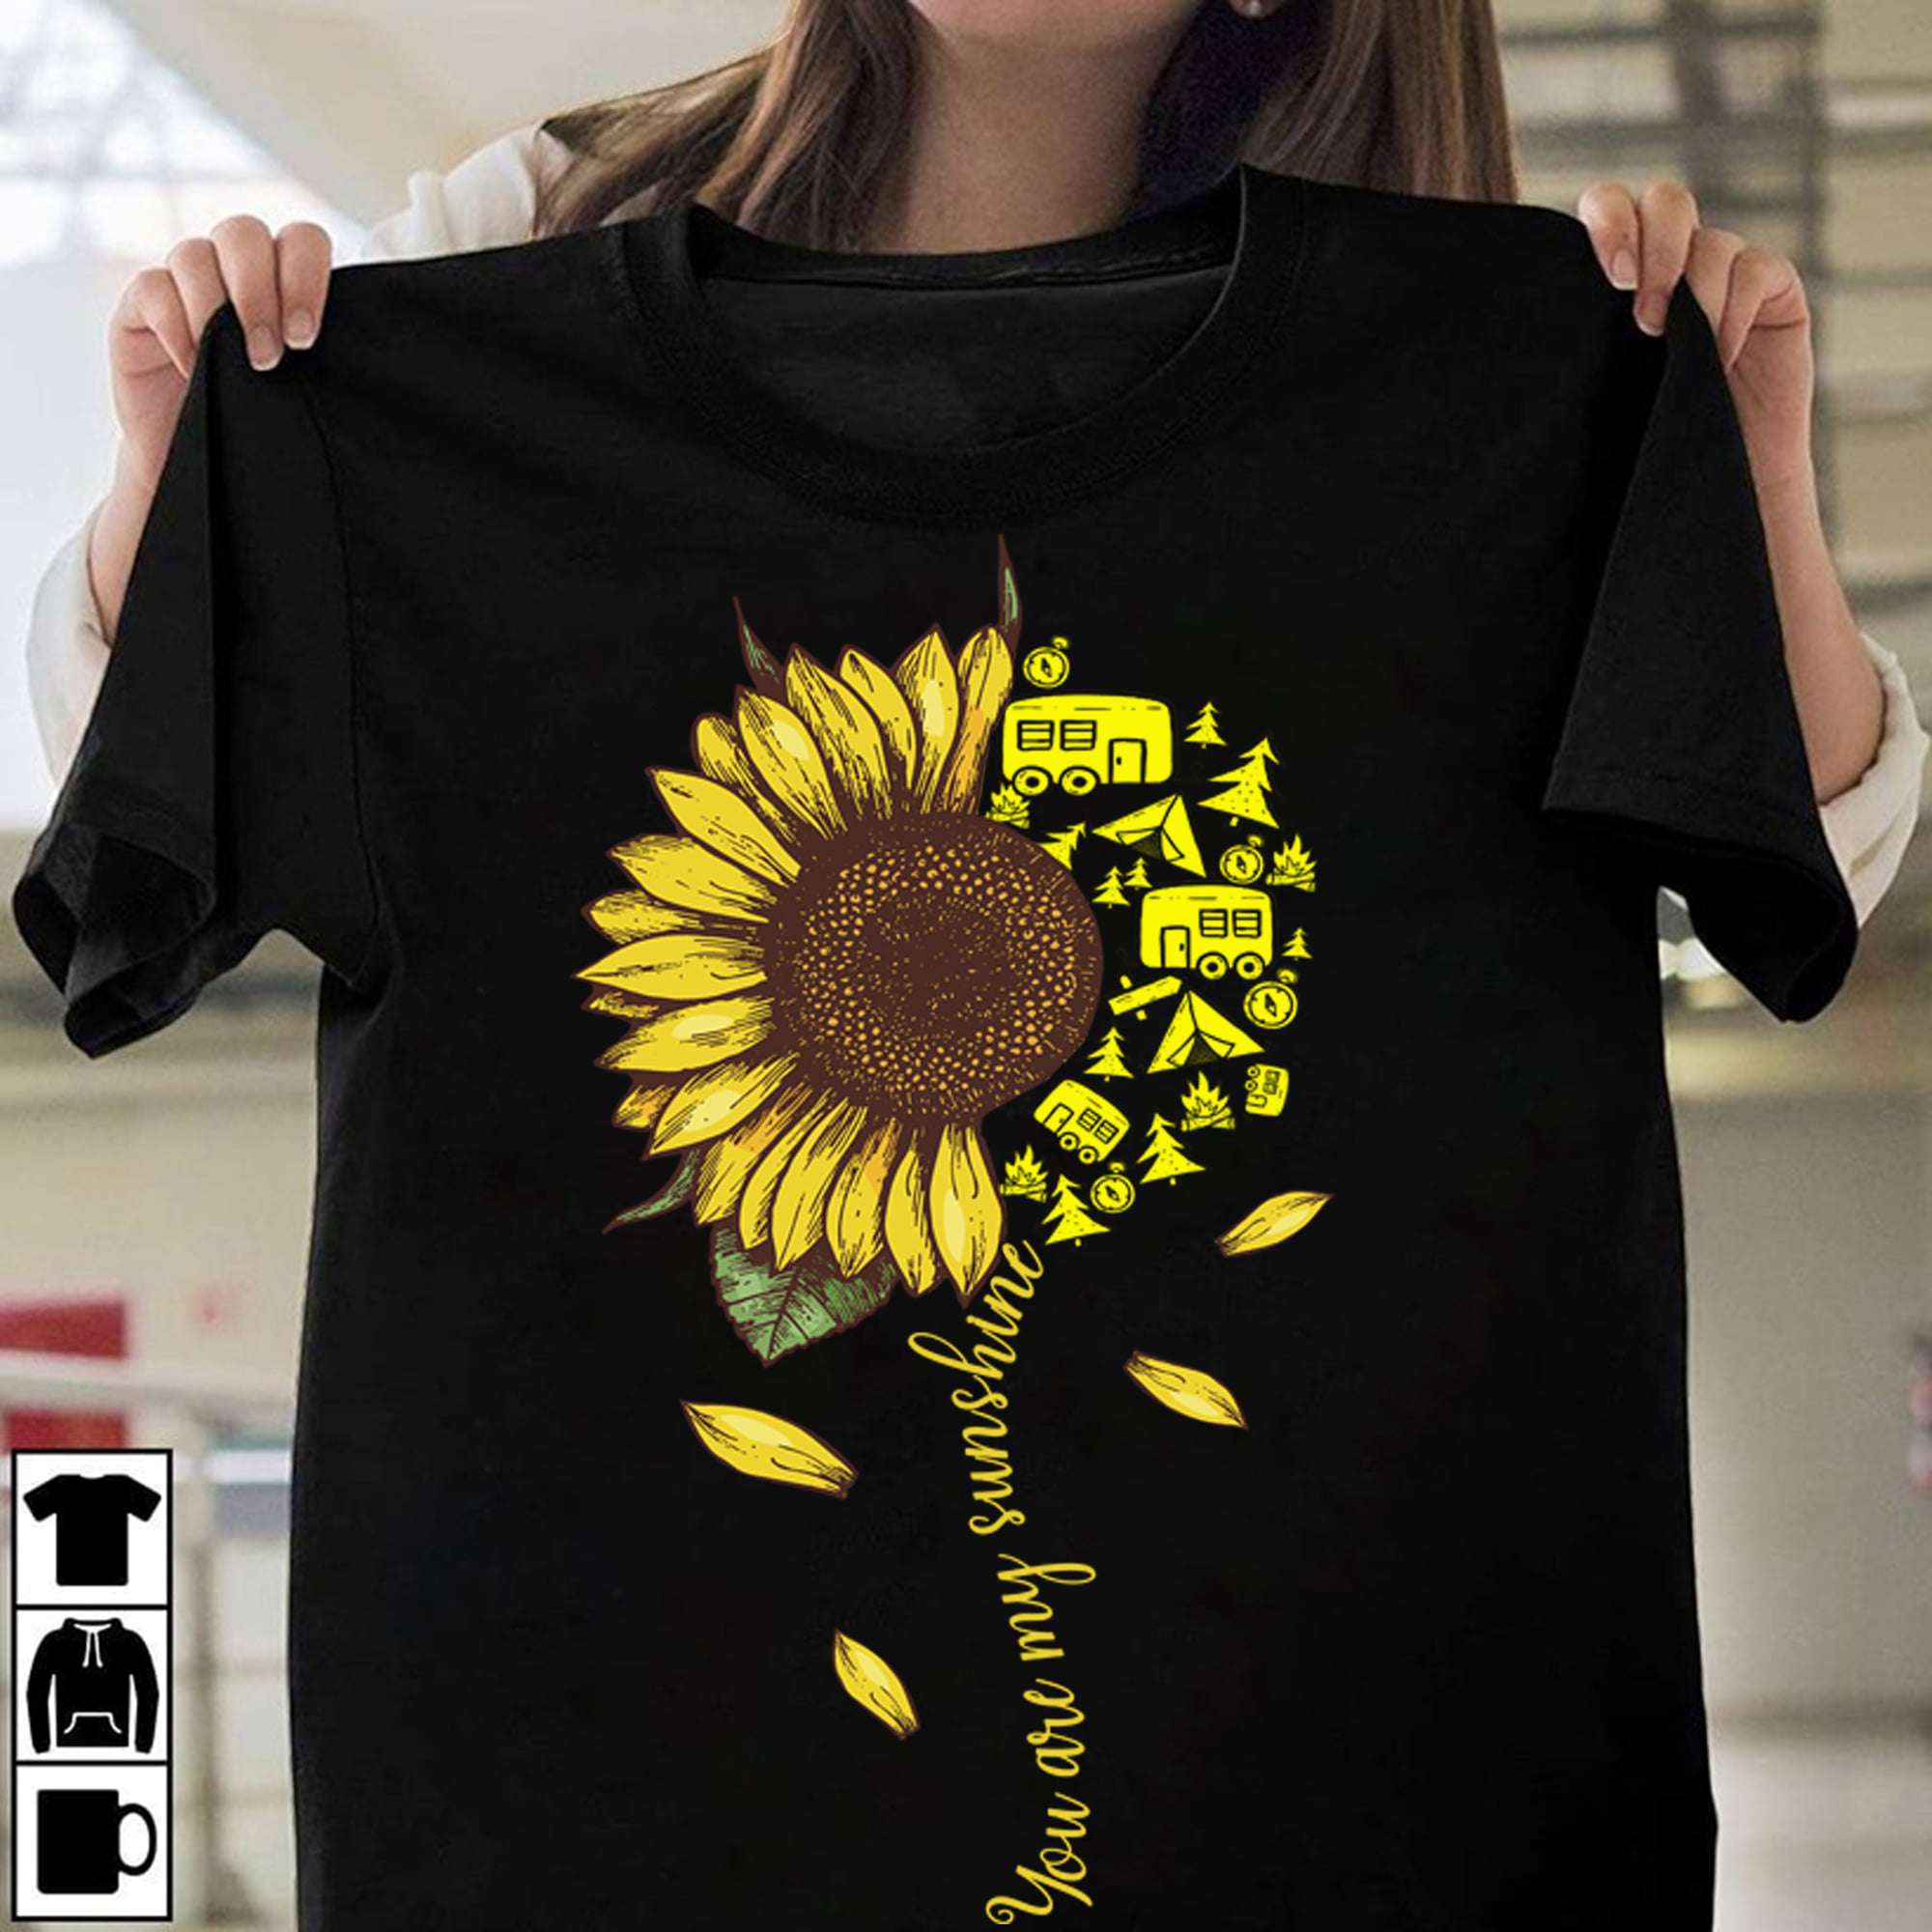 You are my sunshine - Gift for camping person, camping car graphic T-shirt